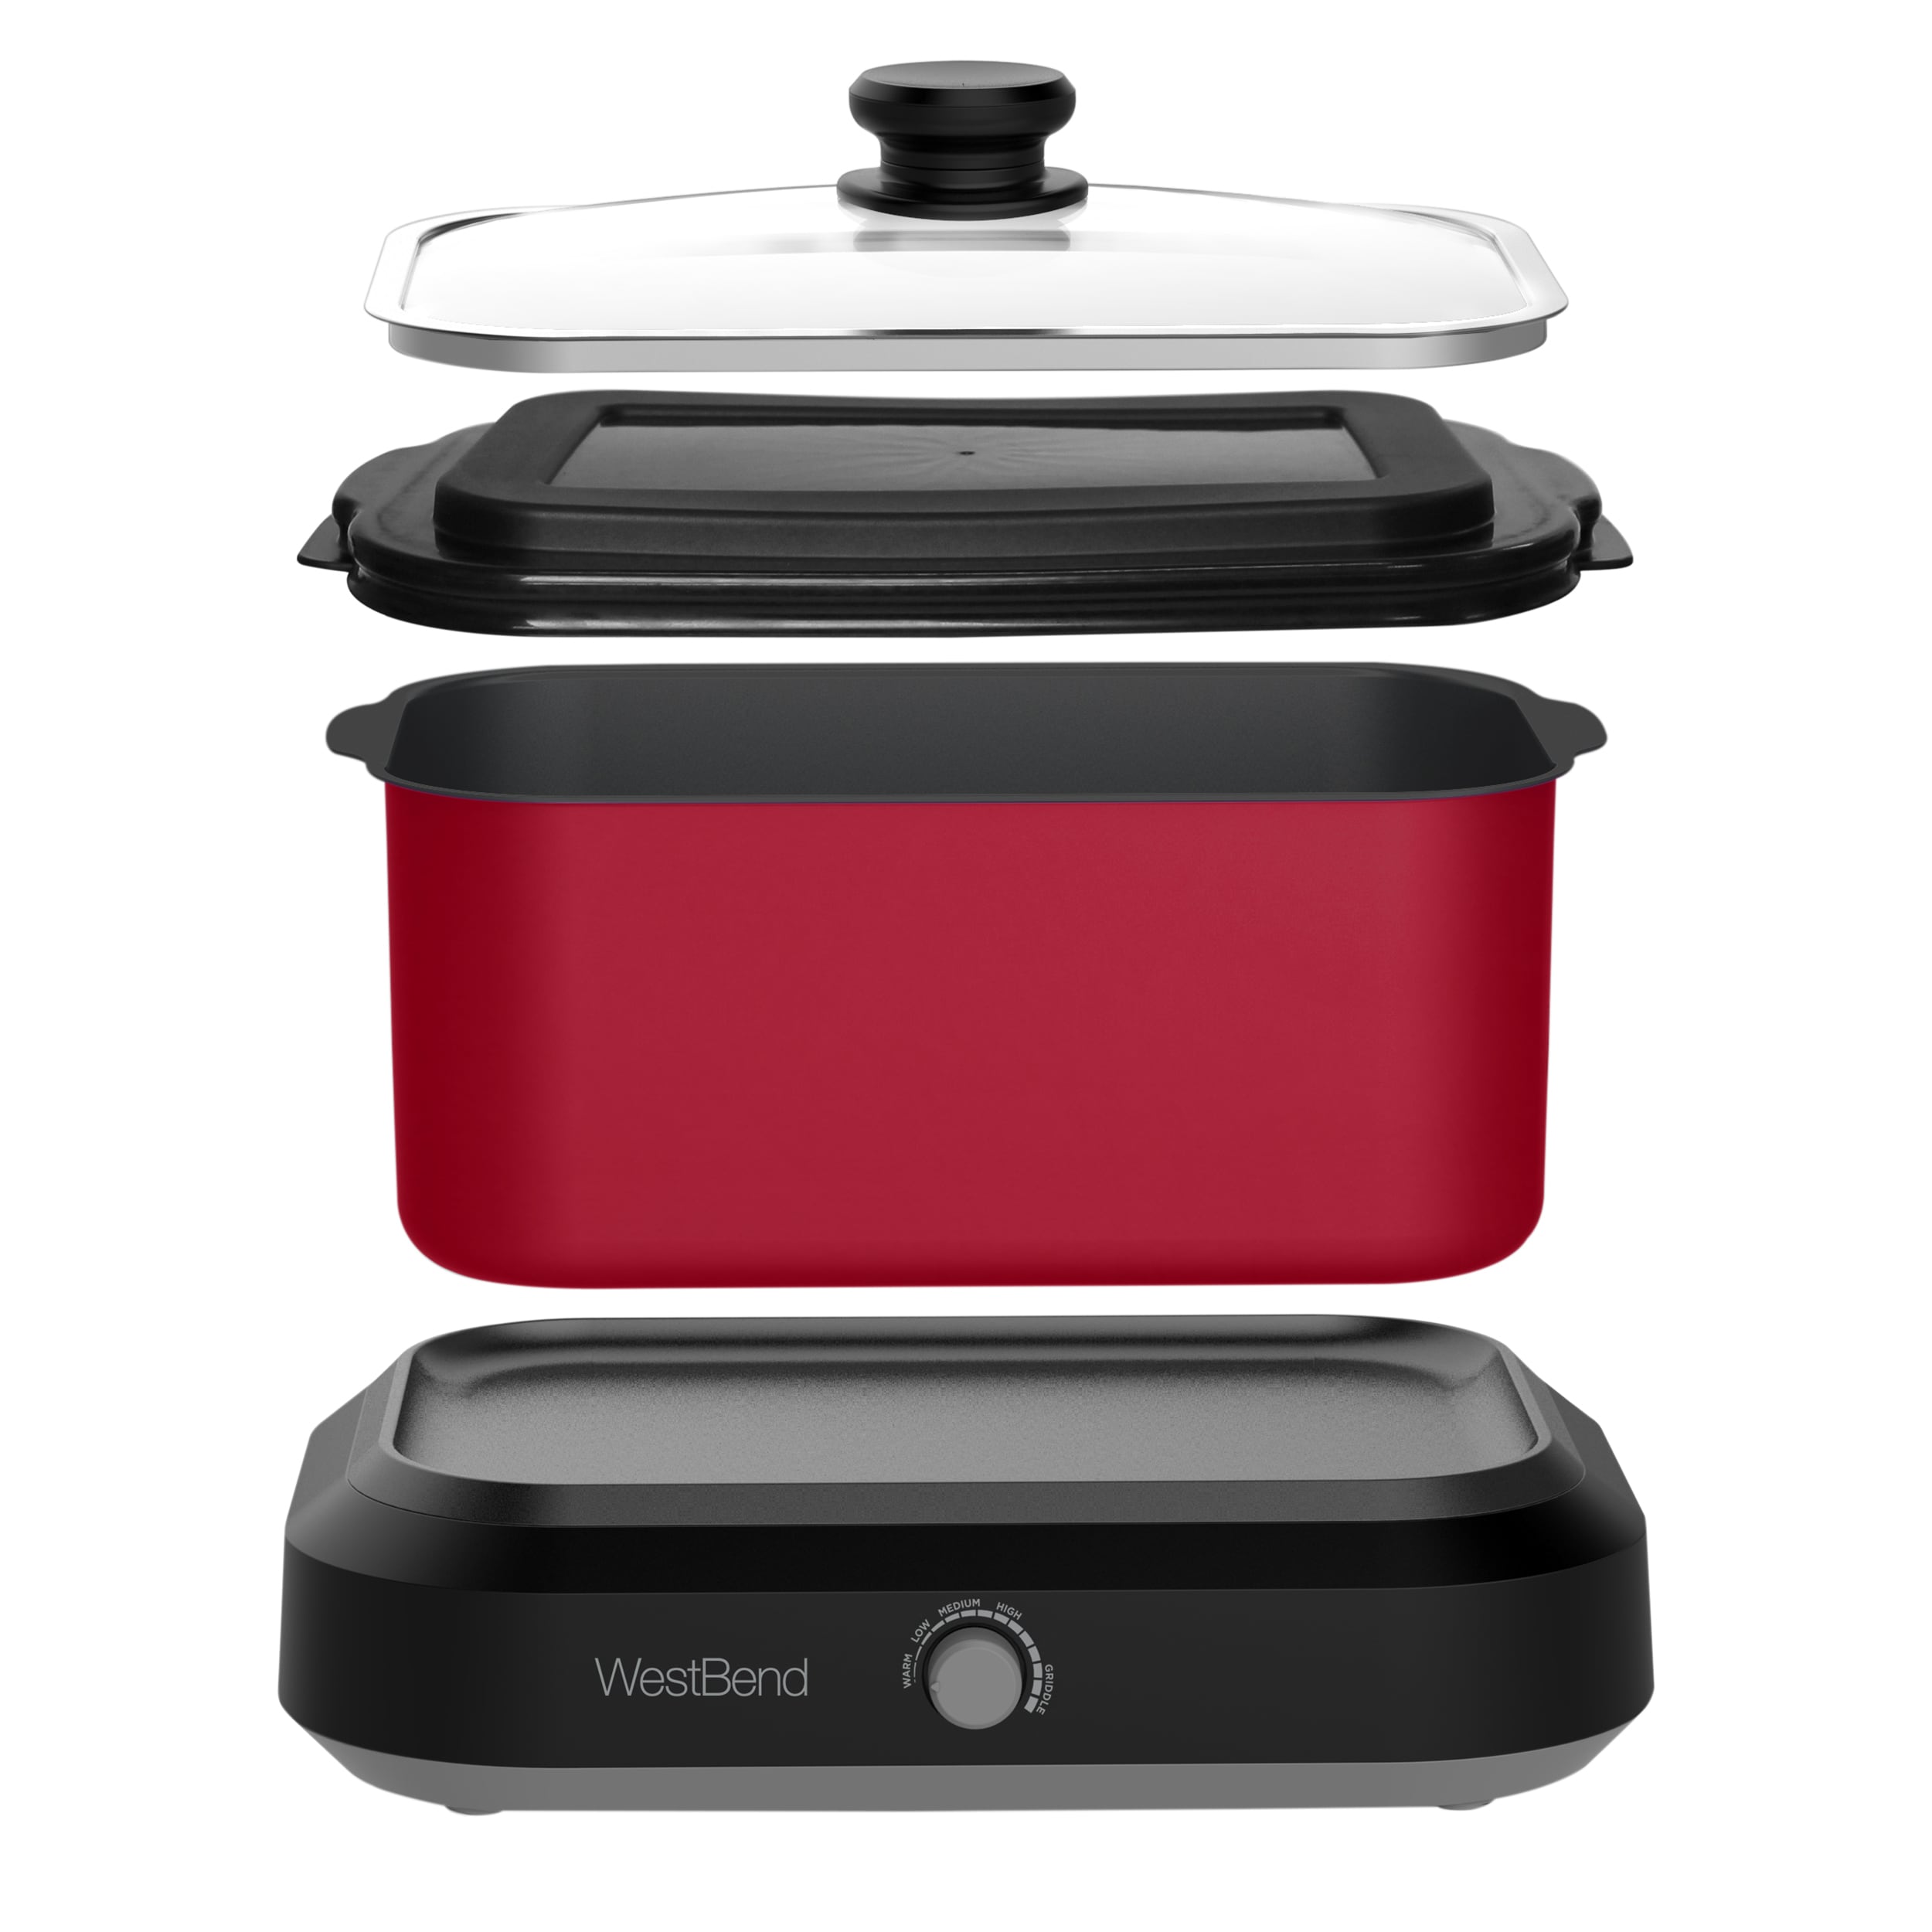 West Bend 6-Quart Red Rectangle Slow Cooker